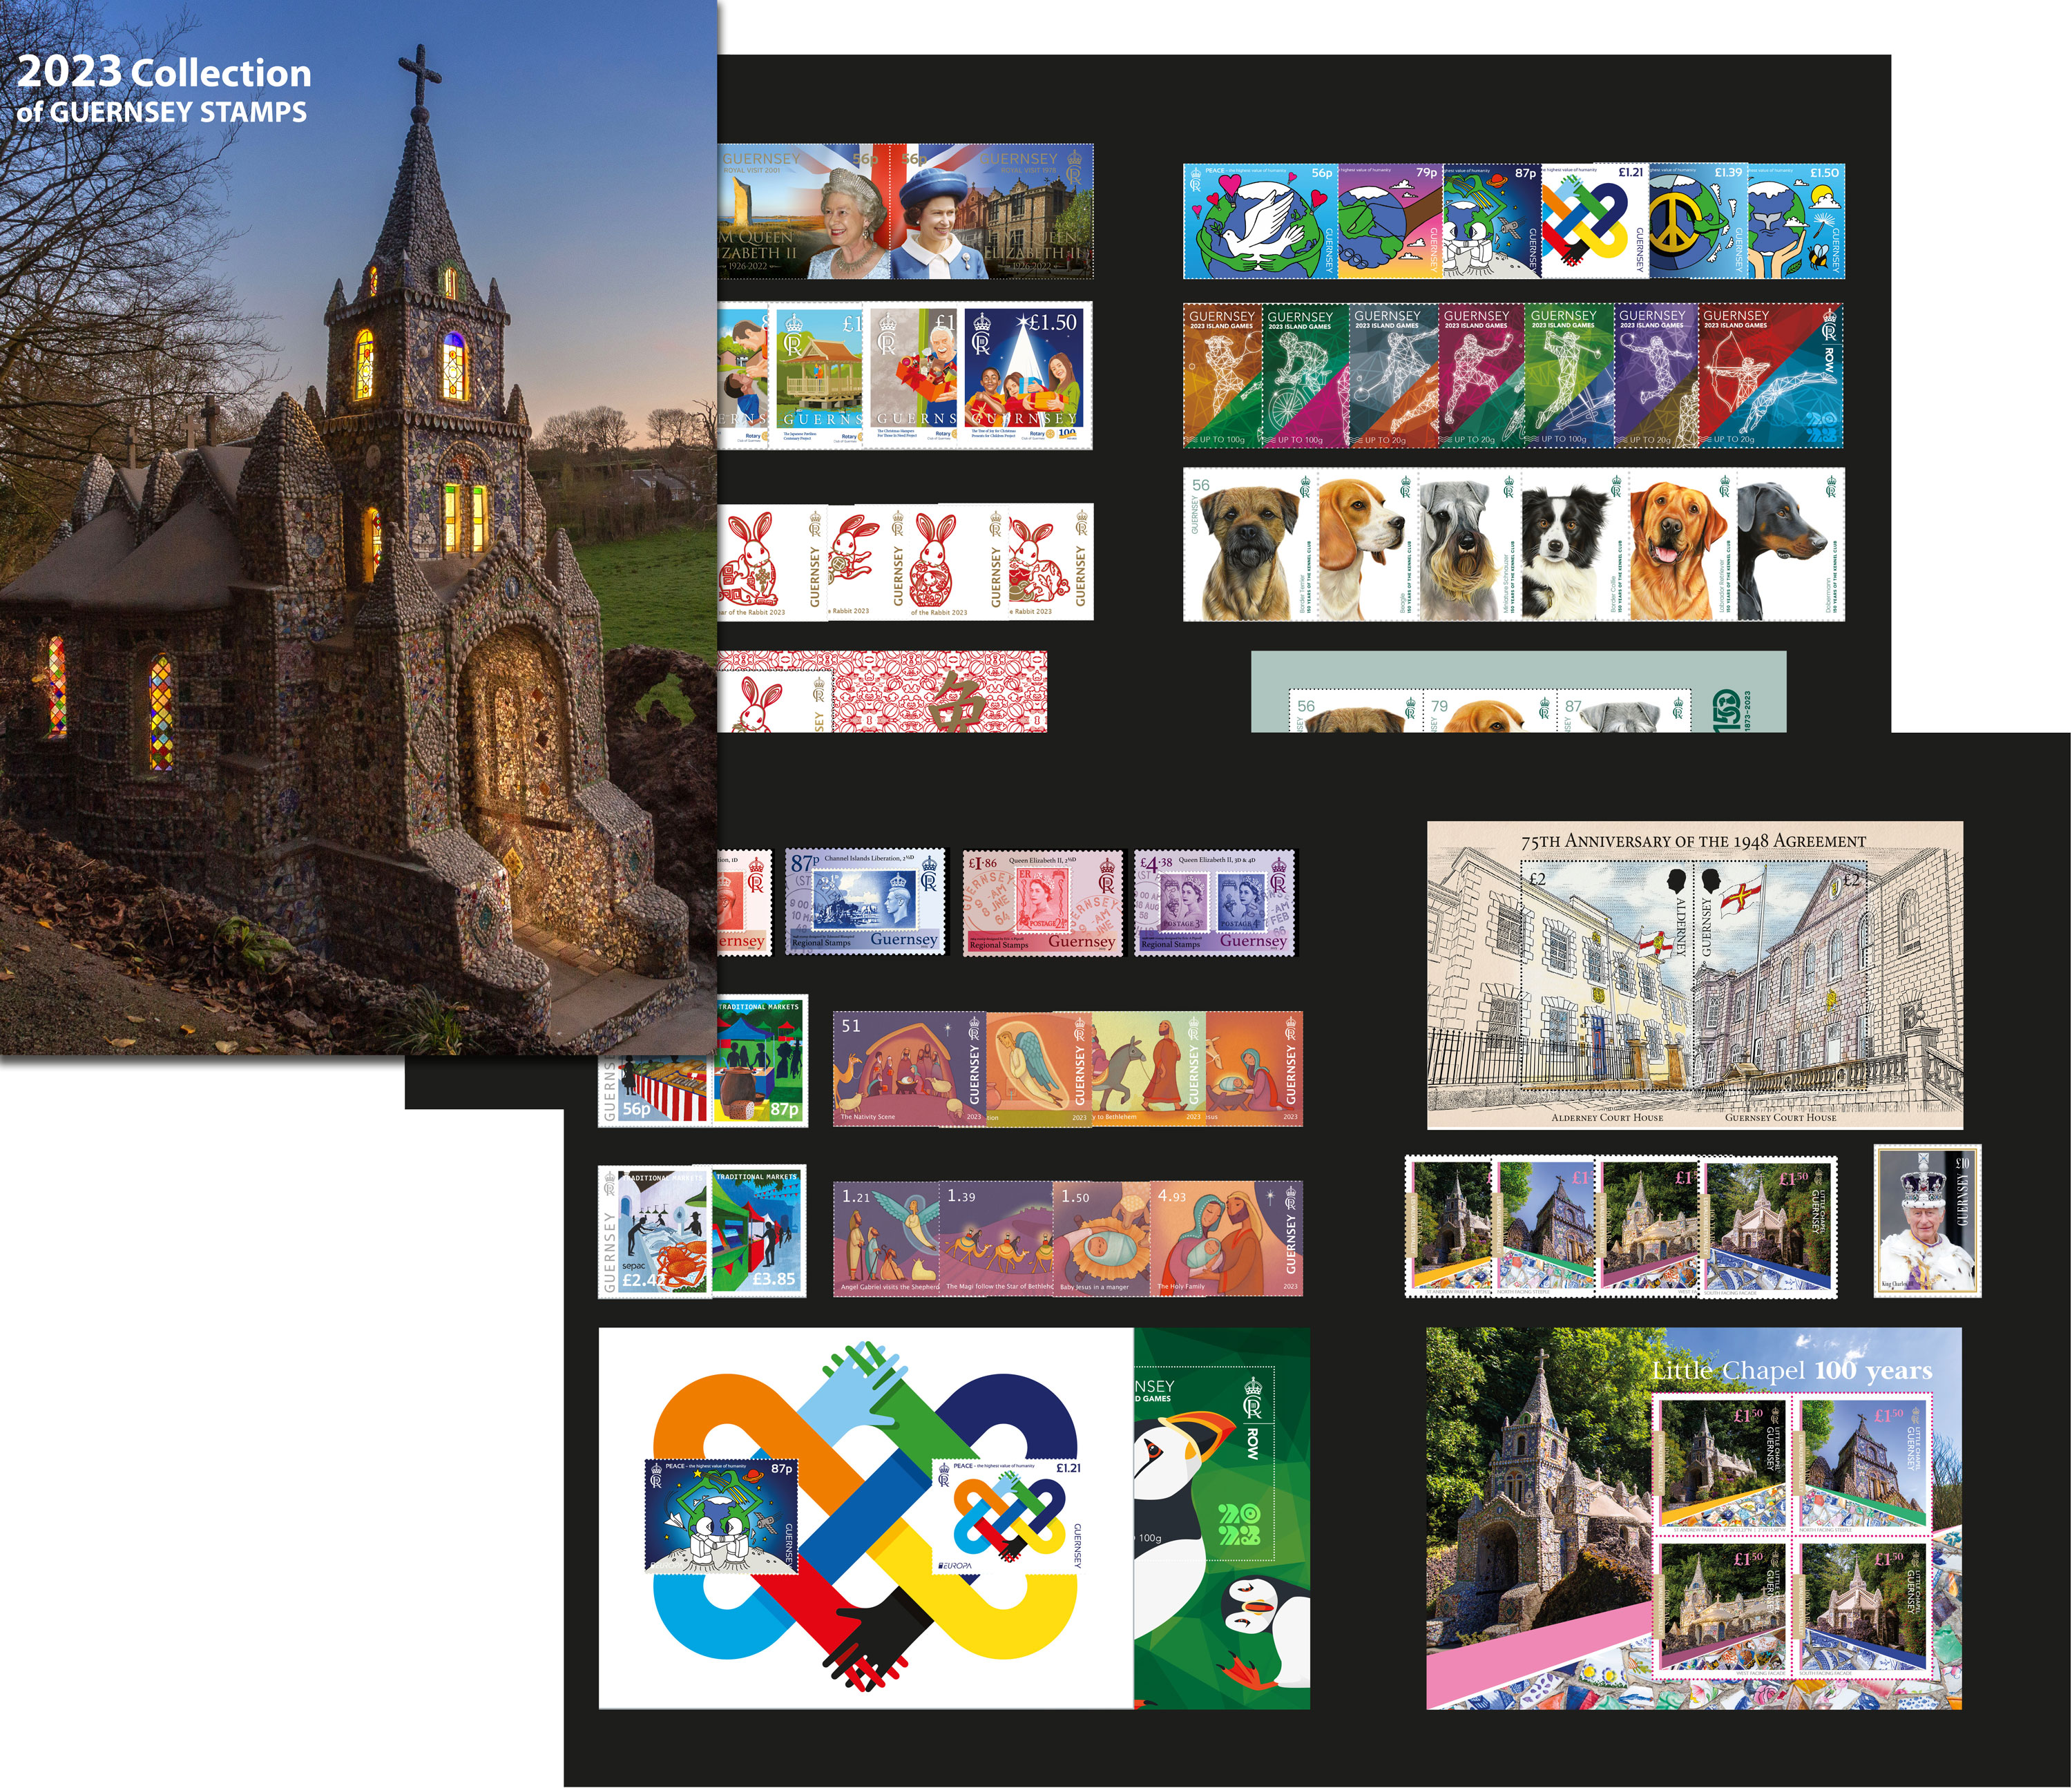 Guernsey Post celebrates a year of stamps and announces first quarter 2024 stamp programme